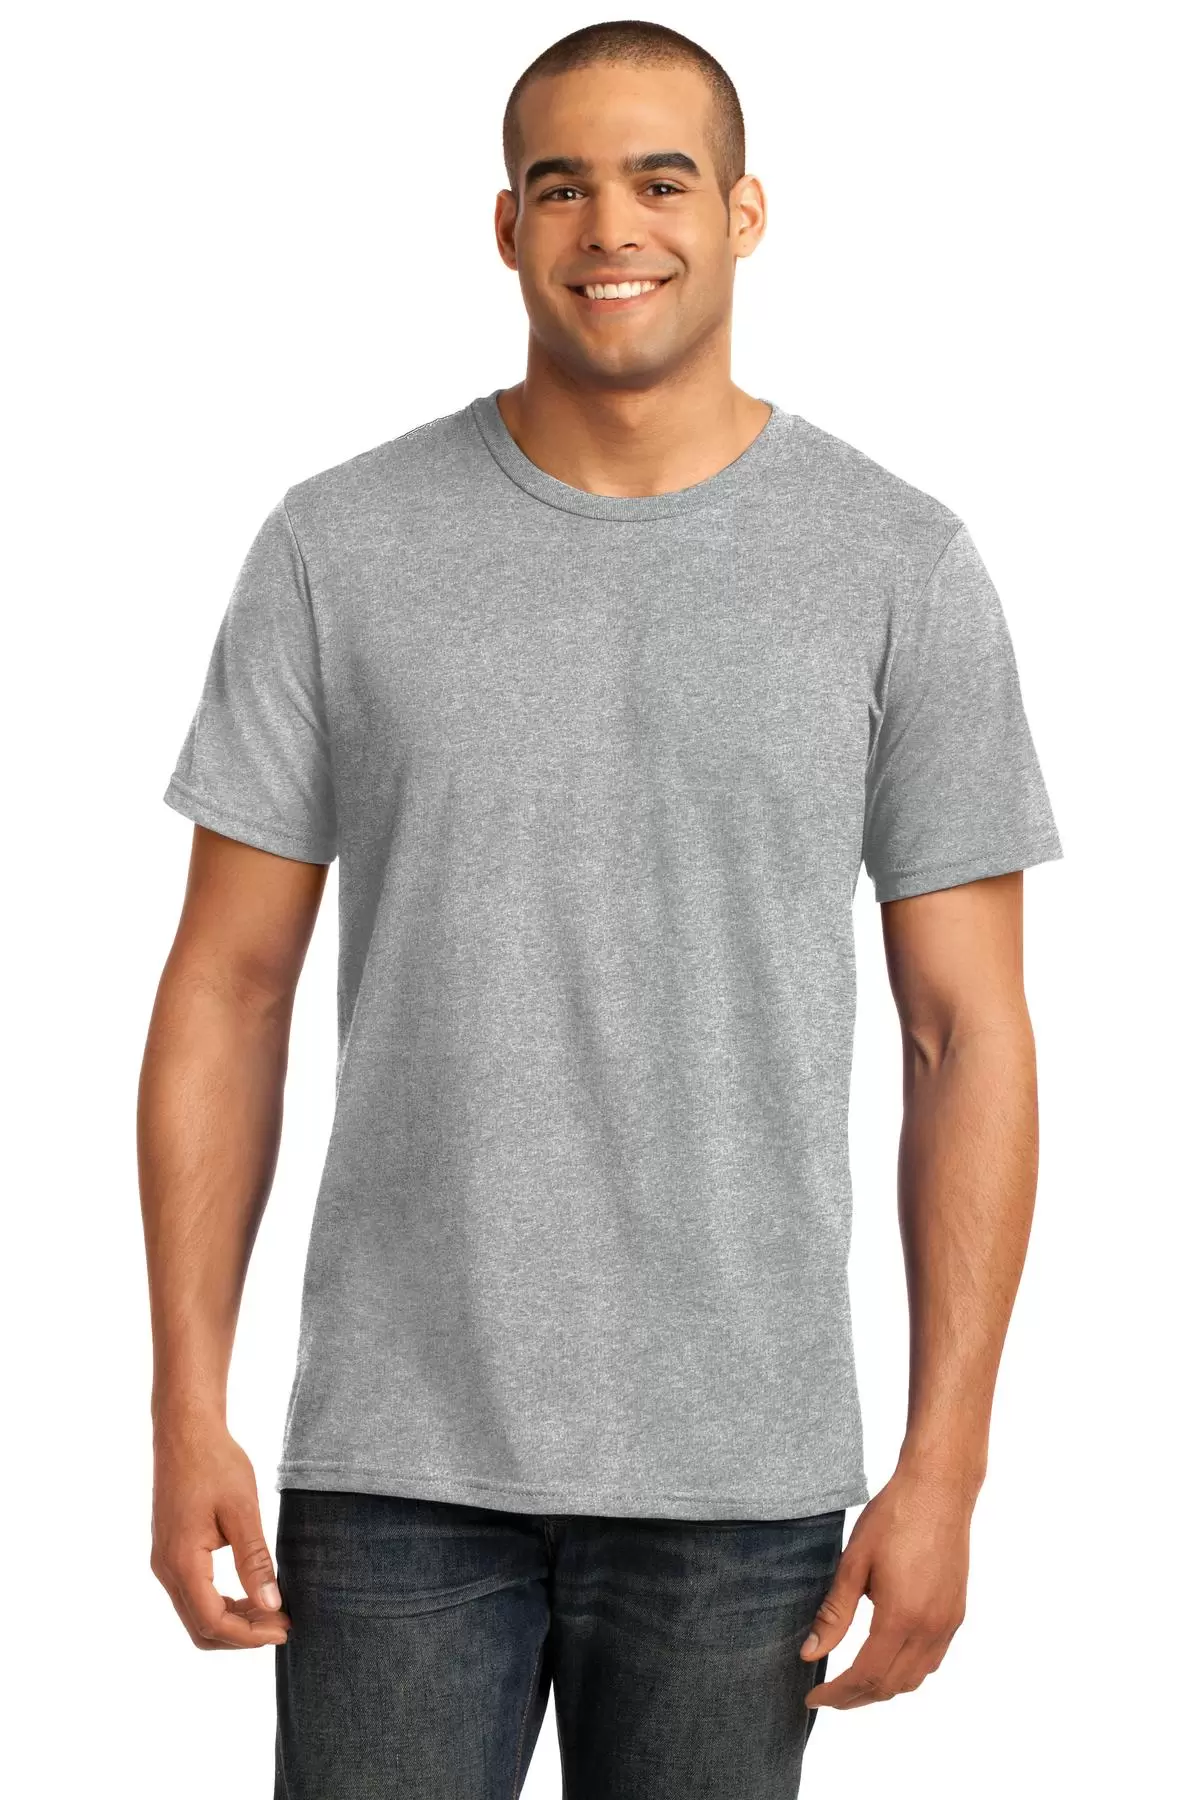 980 Short Sleeve Wholesale Lightweight T-Shirt | Blankstyle - From